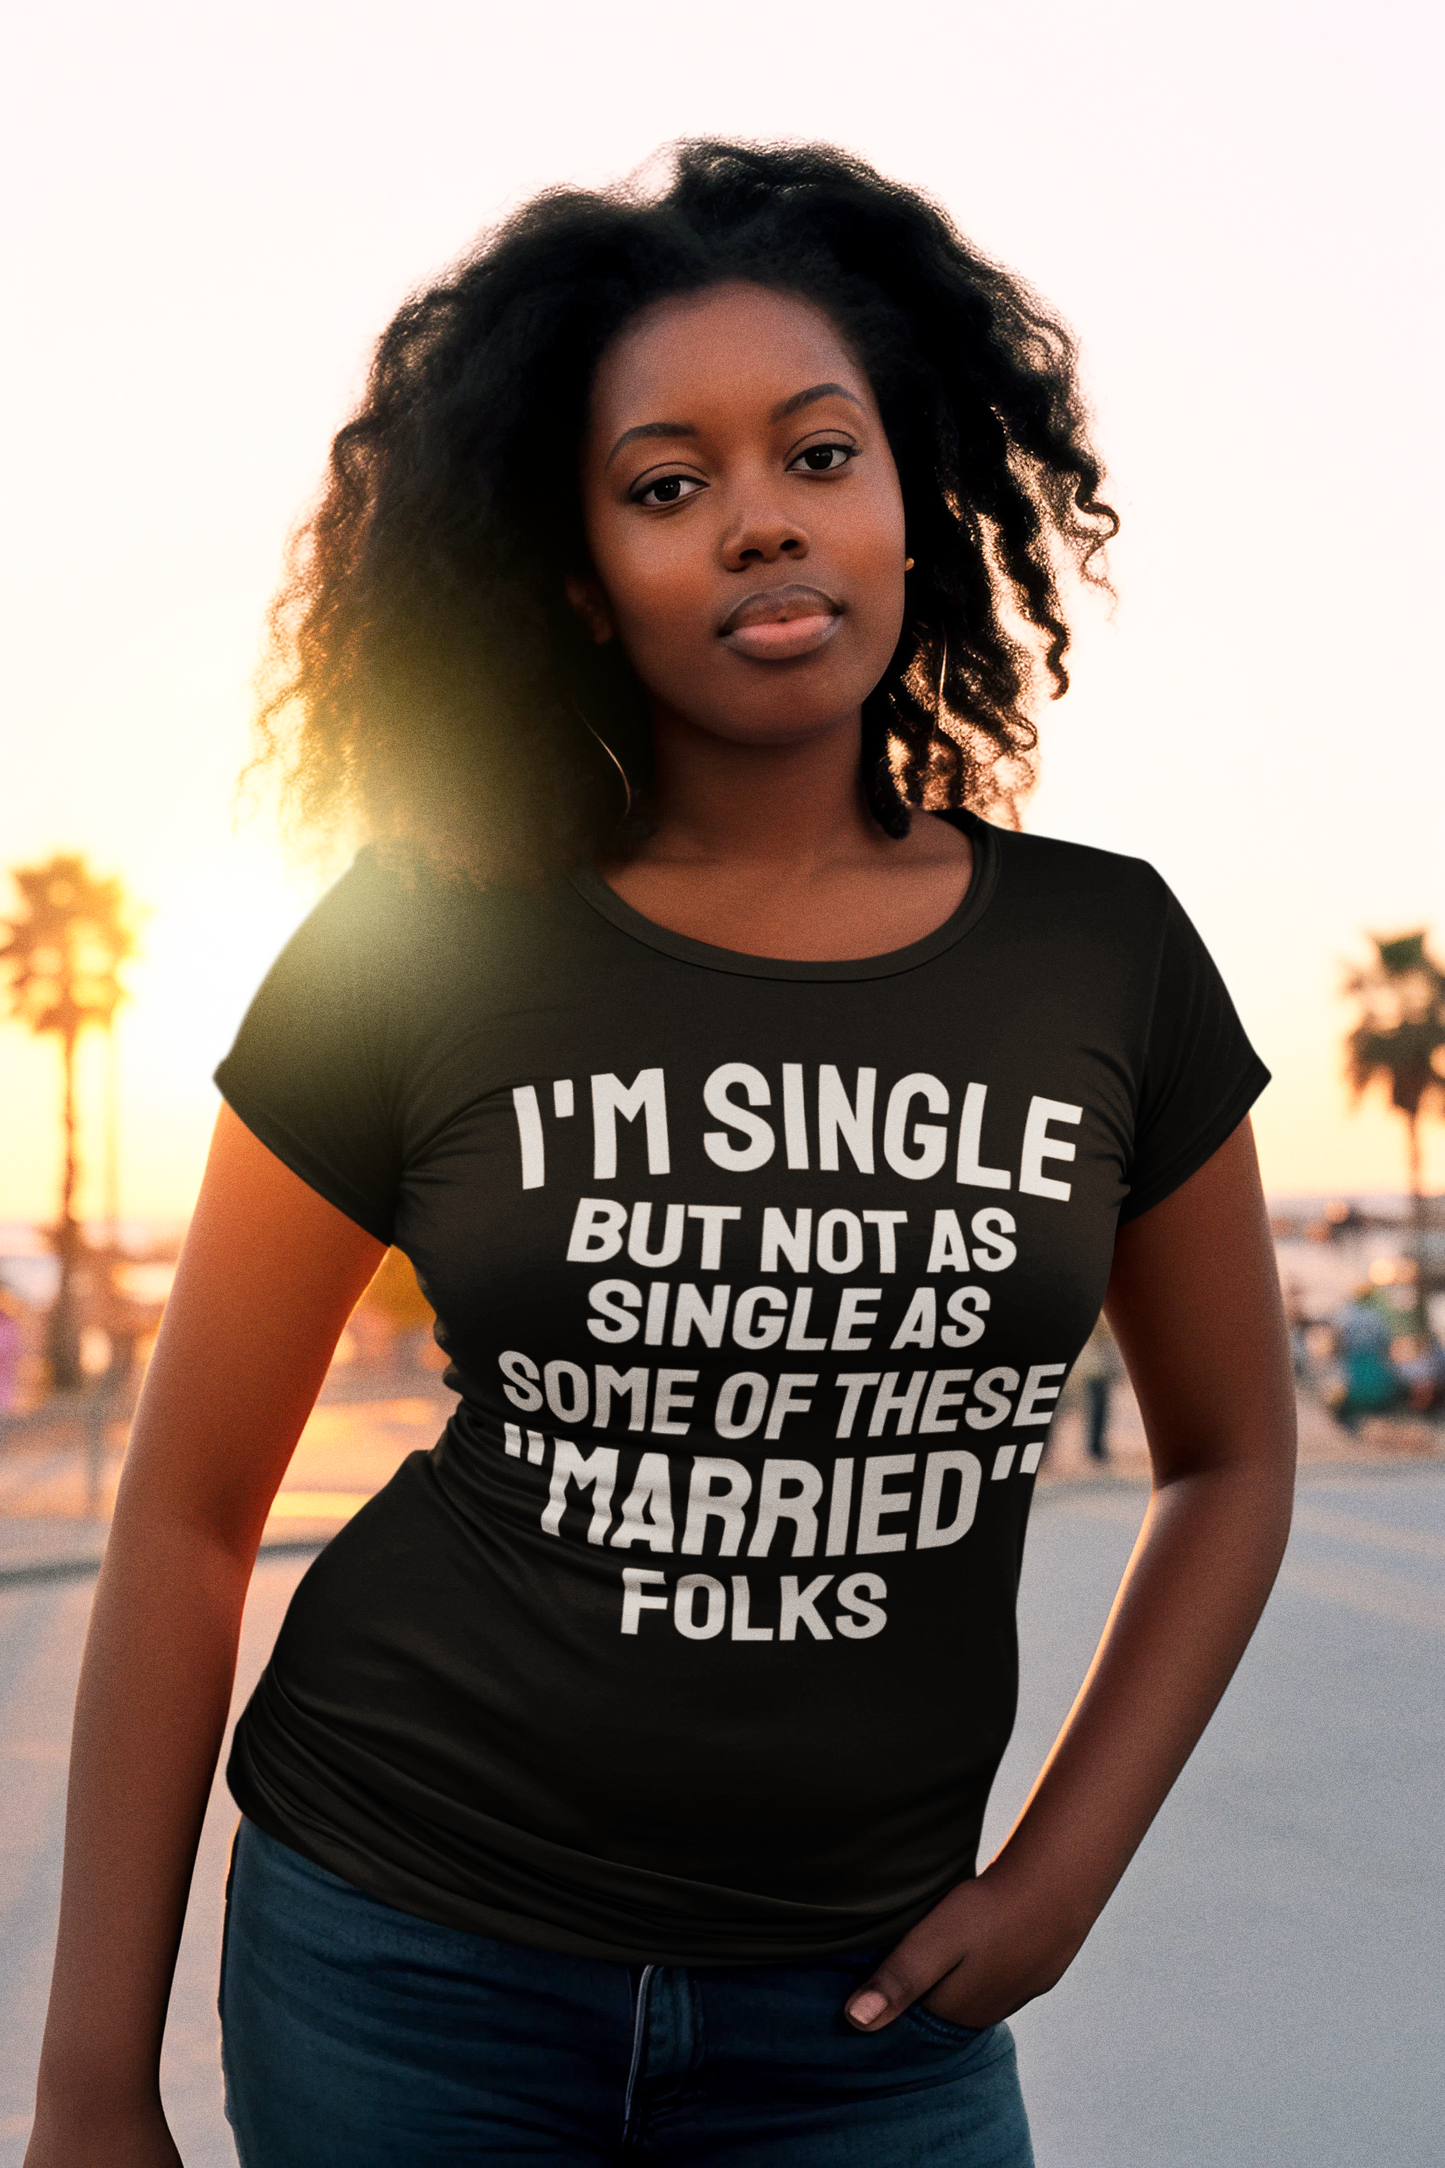 Im Single But Not As Single As Some Of These “MARRIED” Folks T-shirt